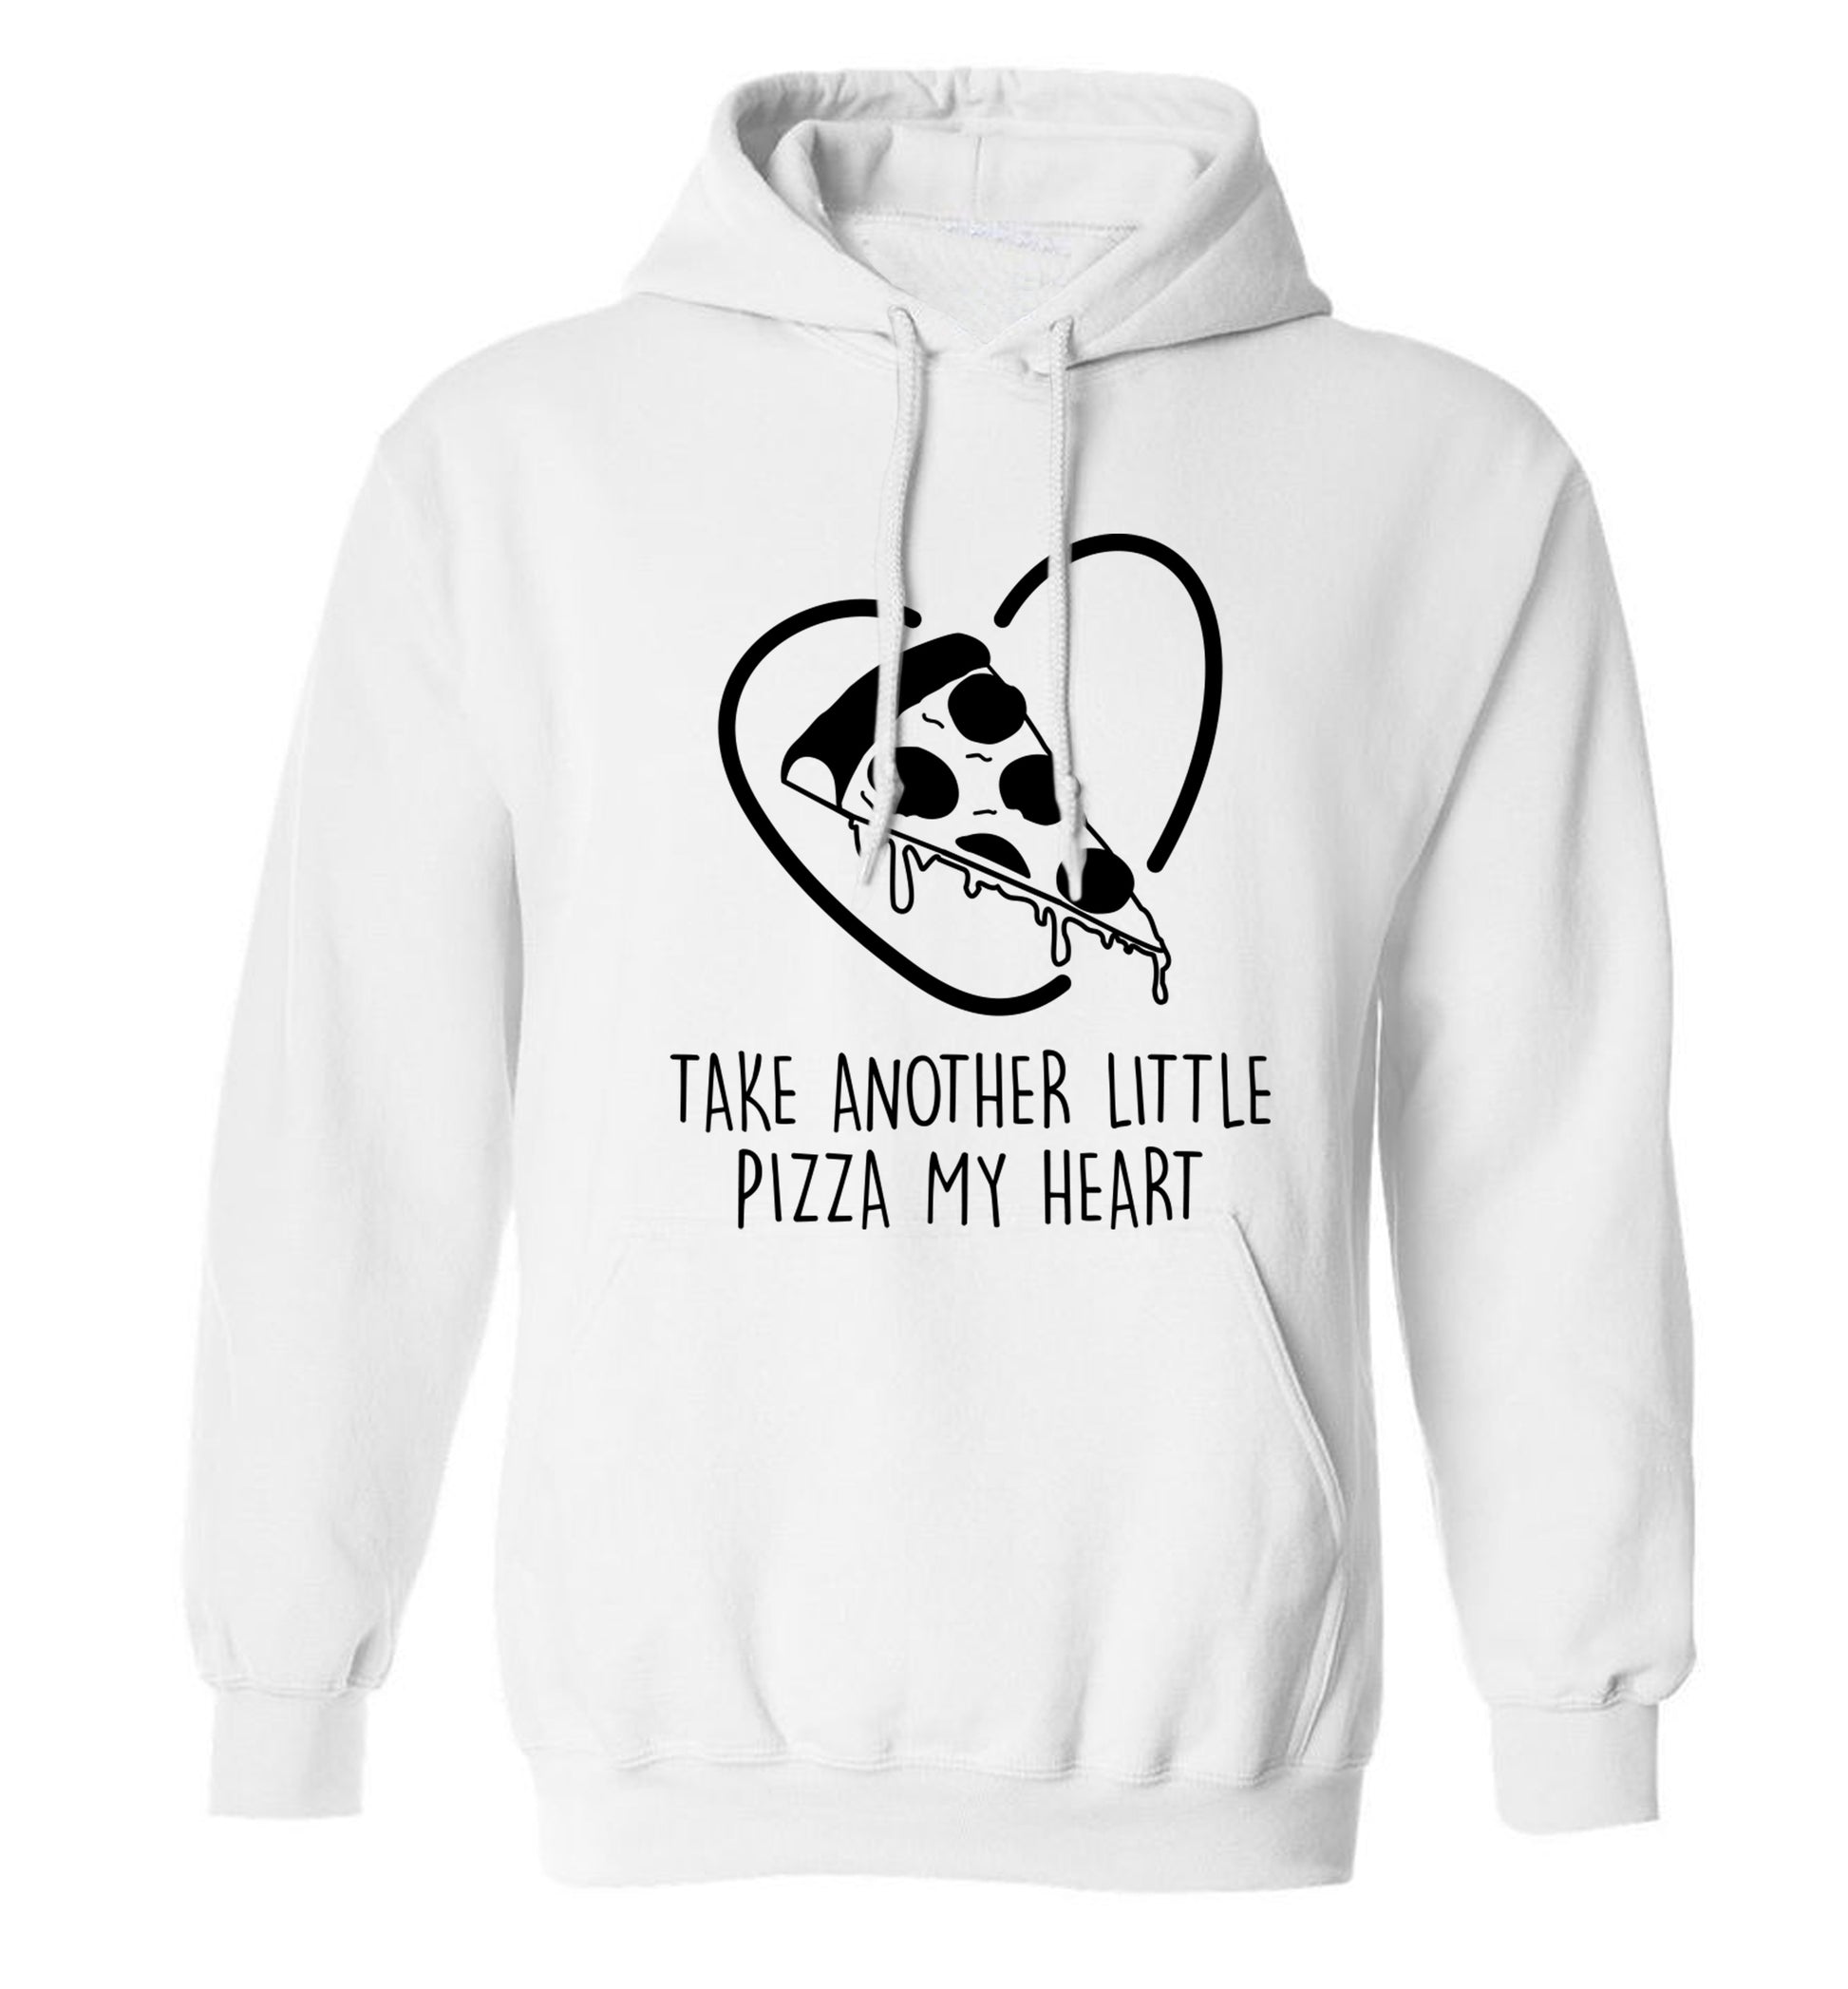 Take another little pizza my heart adults unisex white hoodie 2XL